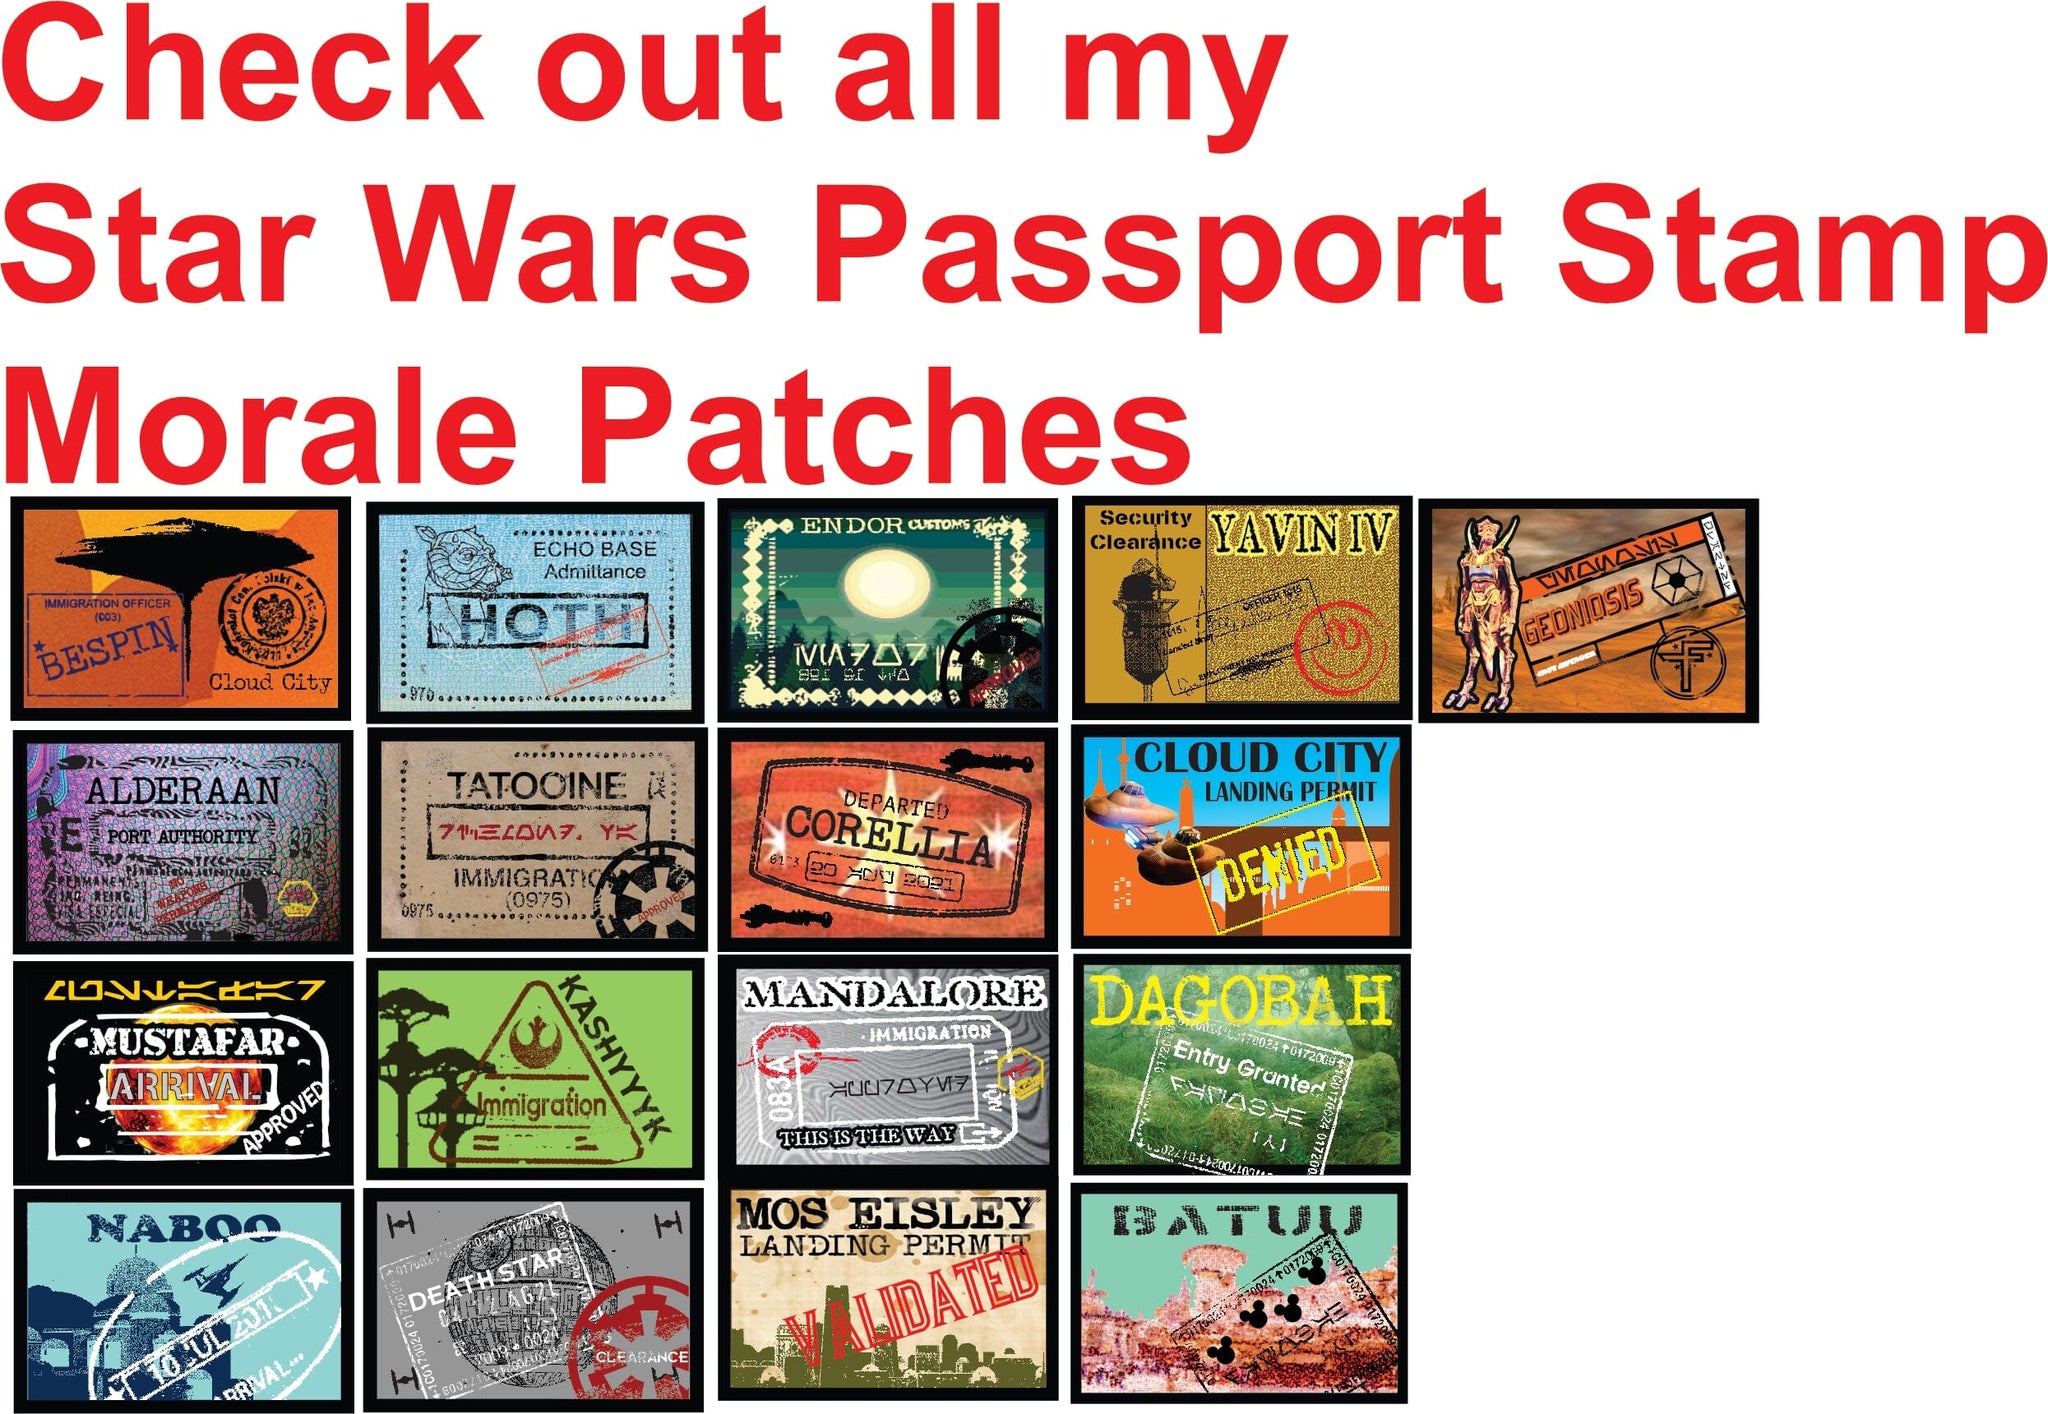 Star wars passport stamp morale patches from redheadedtshirts